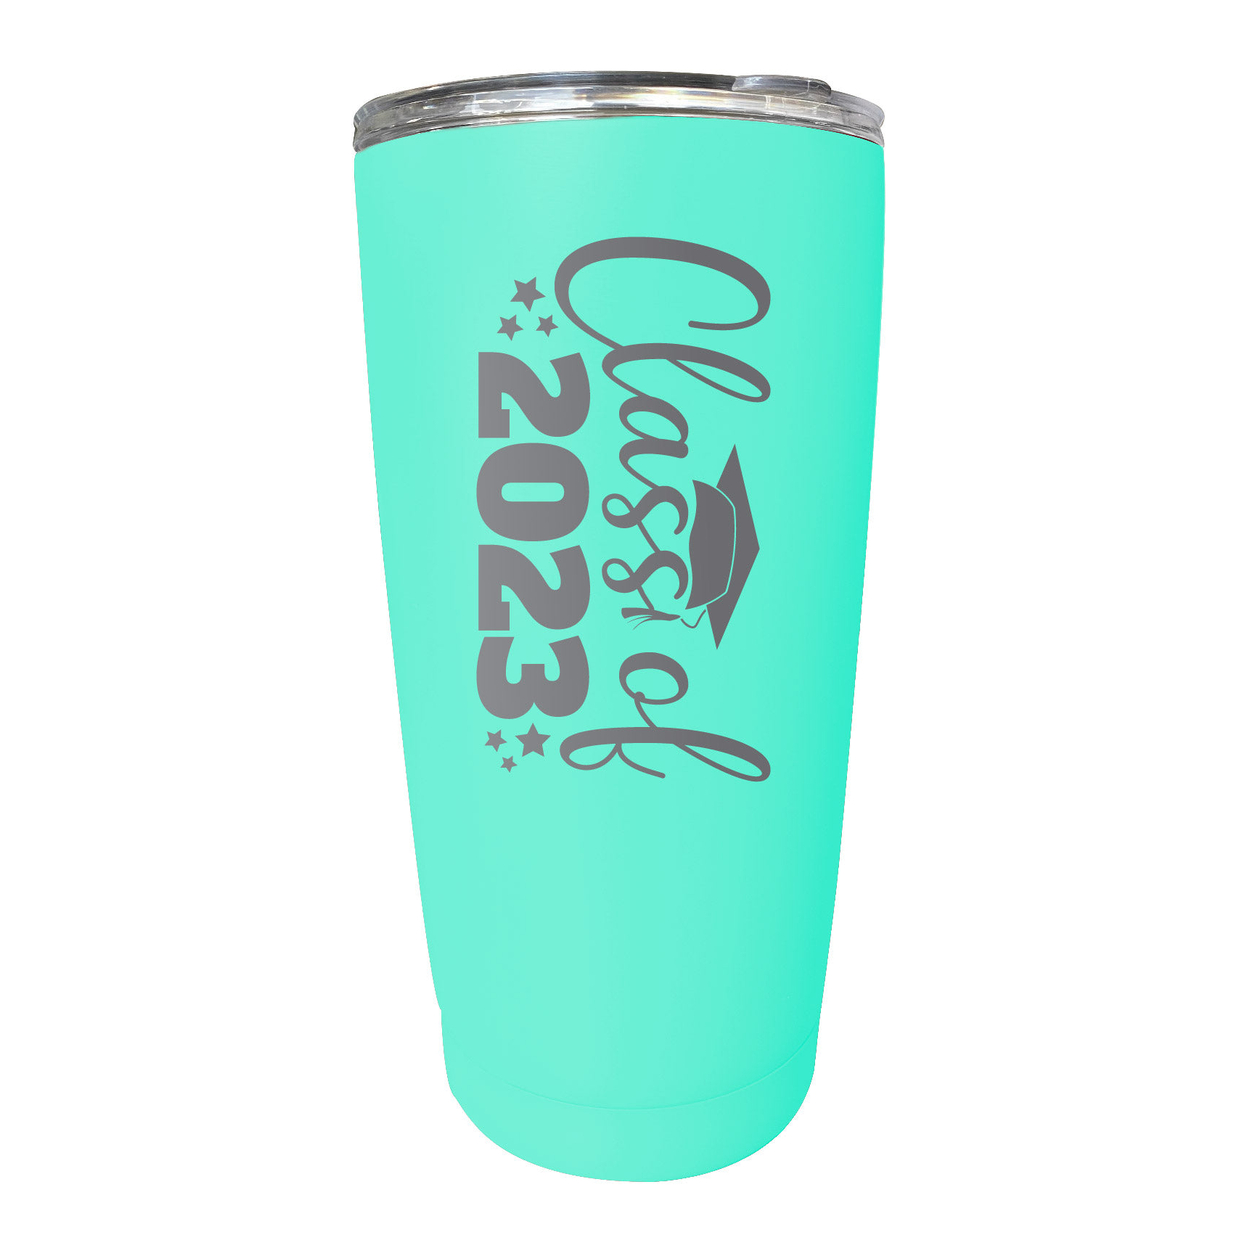 Class Of 2023 Graduation 16 Oz Engraved Stainless Steel Insulated Tumbler Colors - Seafoam